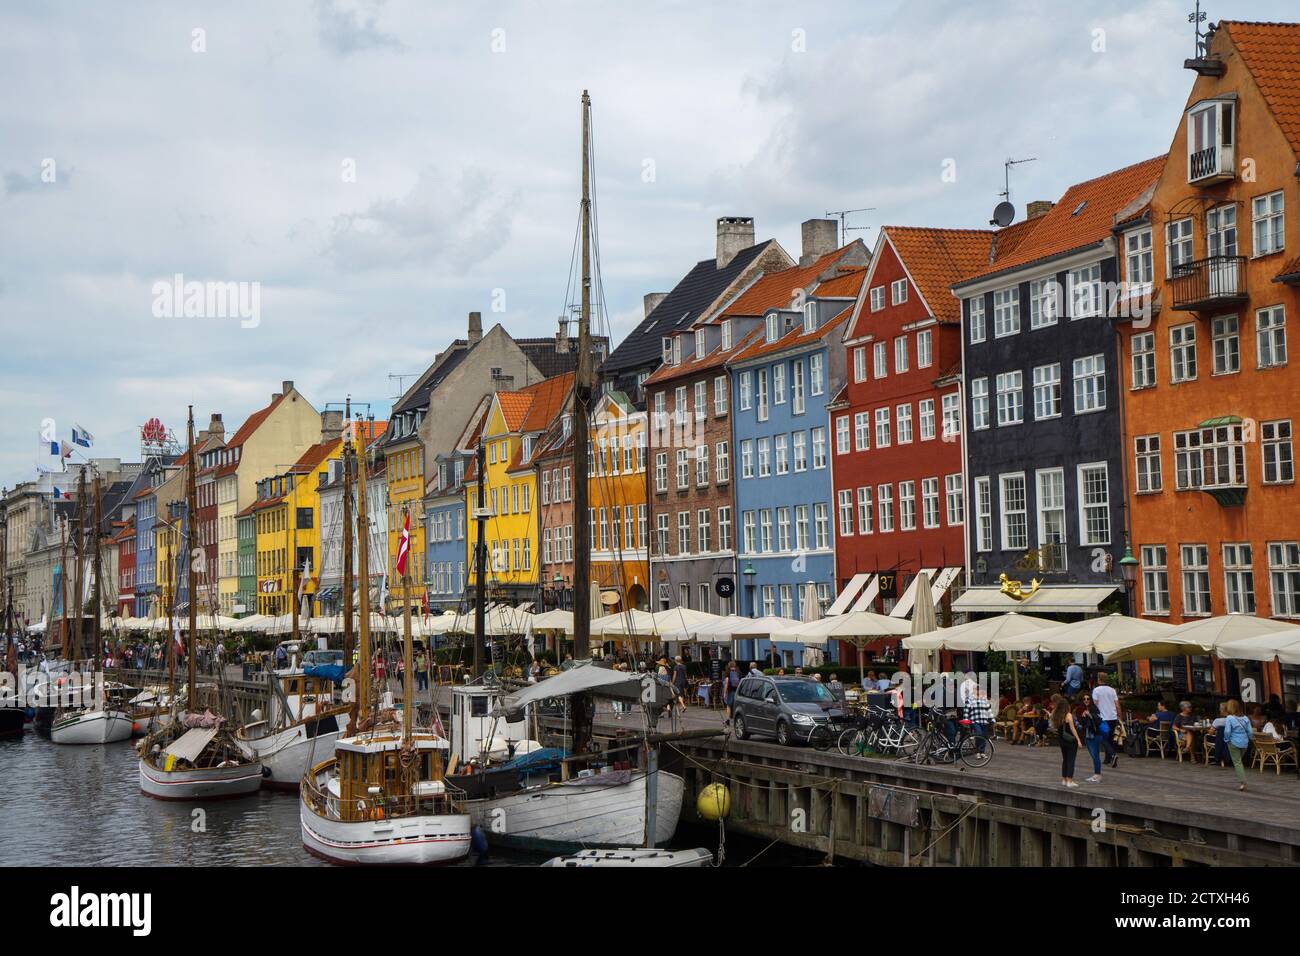 Nyhavn is a waterfront and canal in Copenhagen, Denmark. Colourful facades of houses and old ships along the canal. Wooden ships moored in the canal. Stock Photo